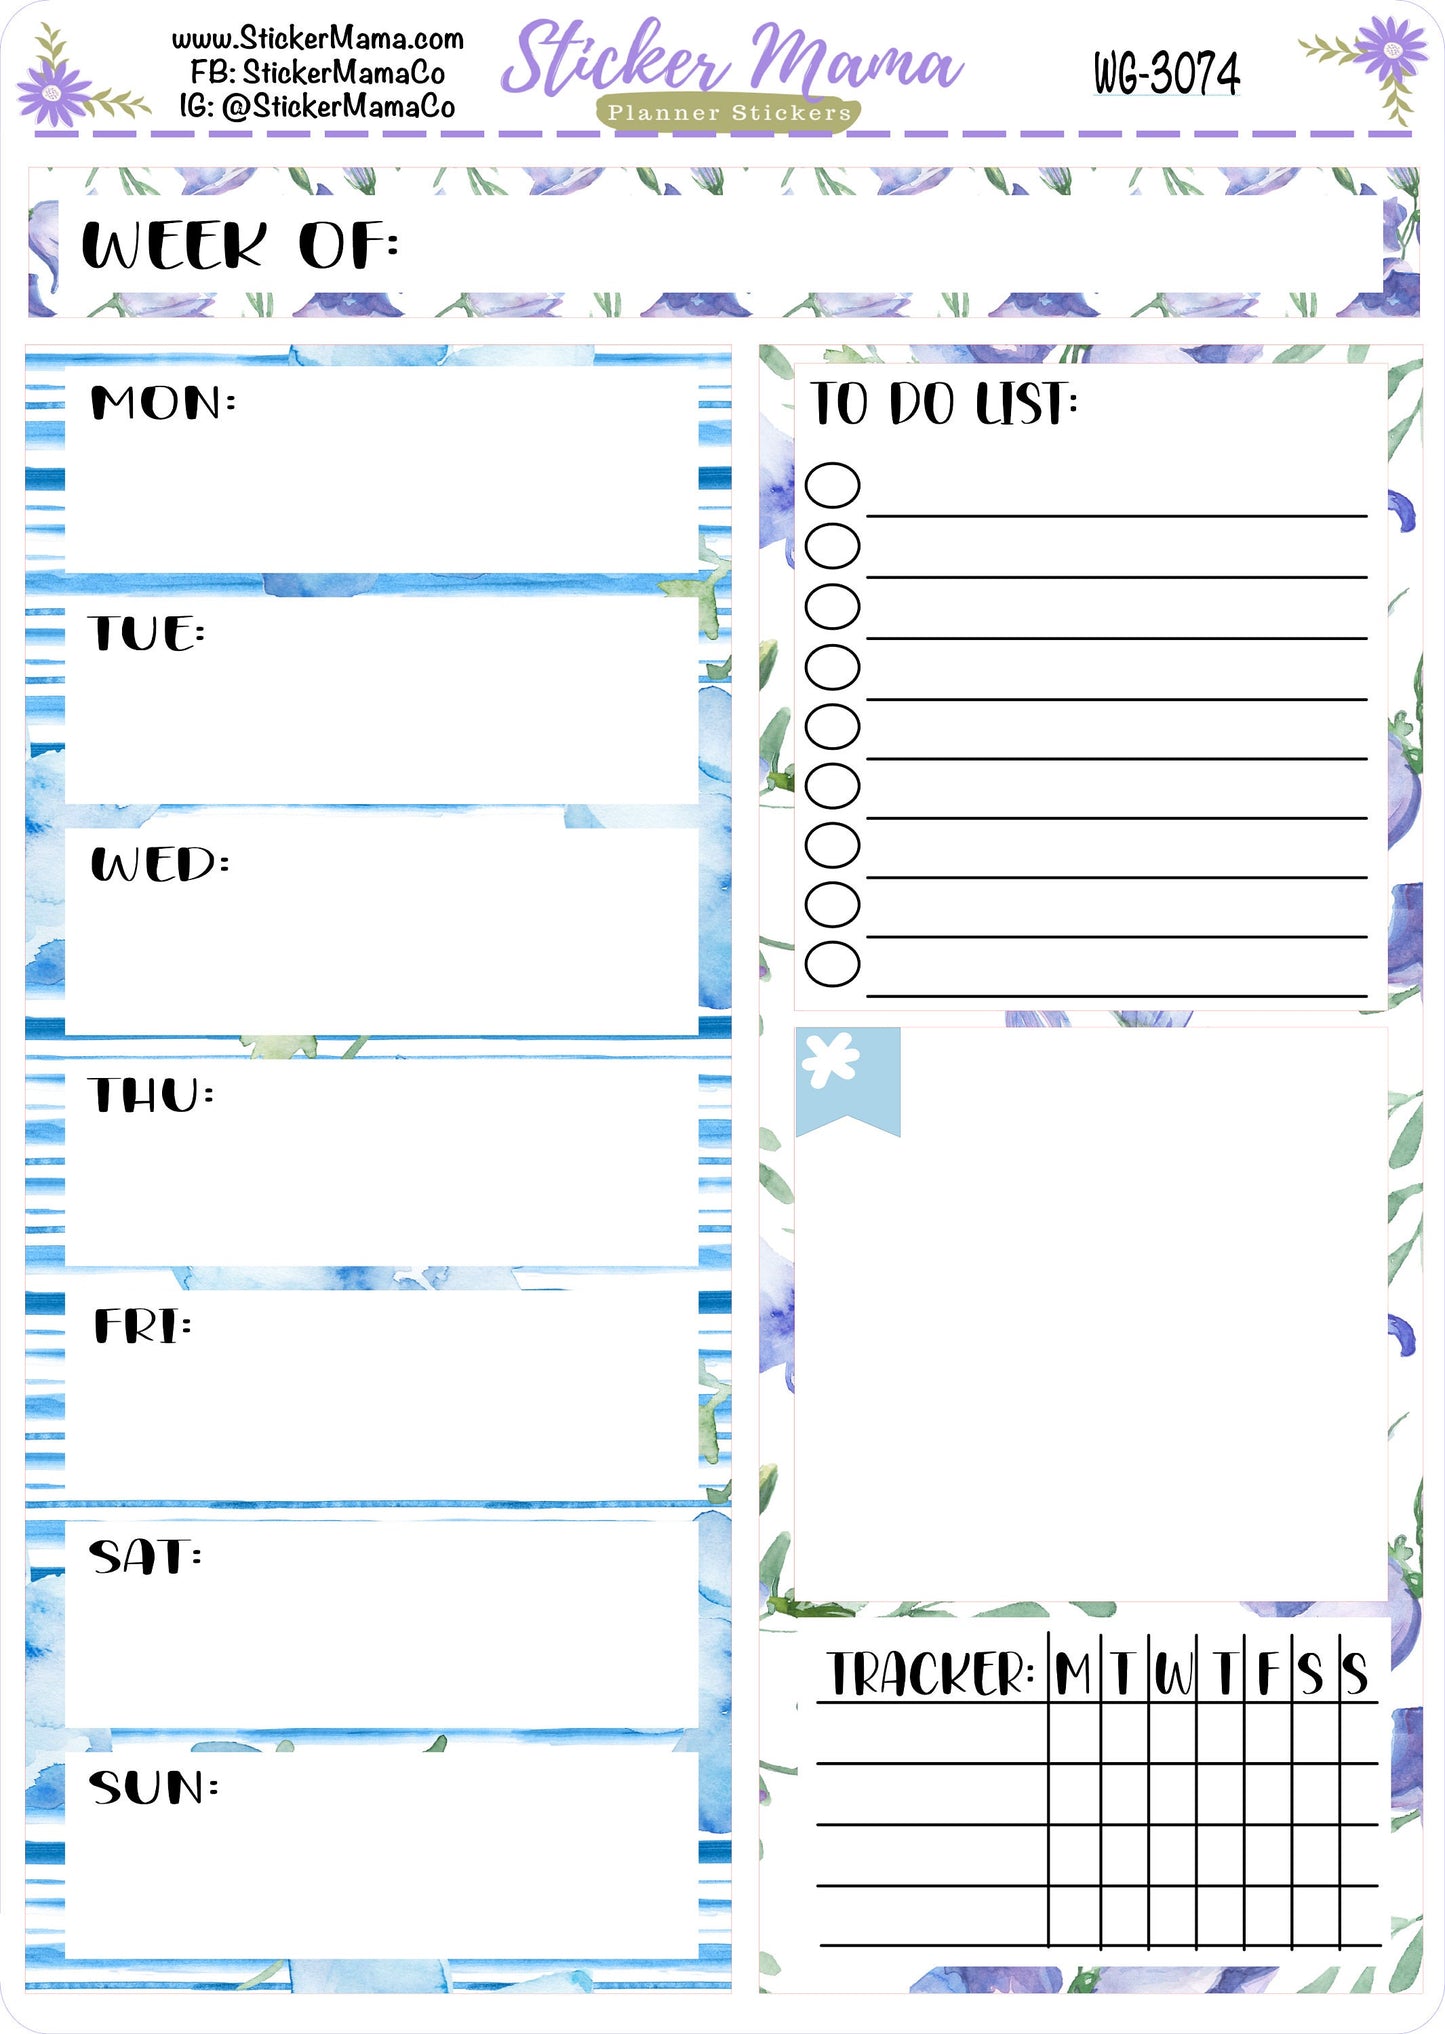 WG-3074 - WEEK at a GLANCE -Bellflowers - weekly glance 7x9 or a5